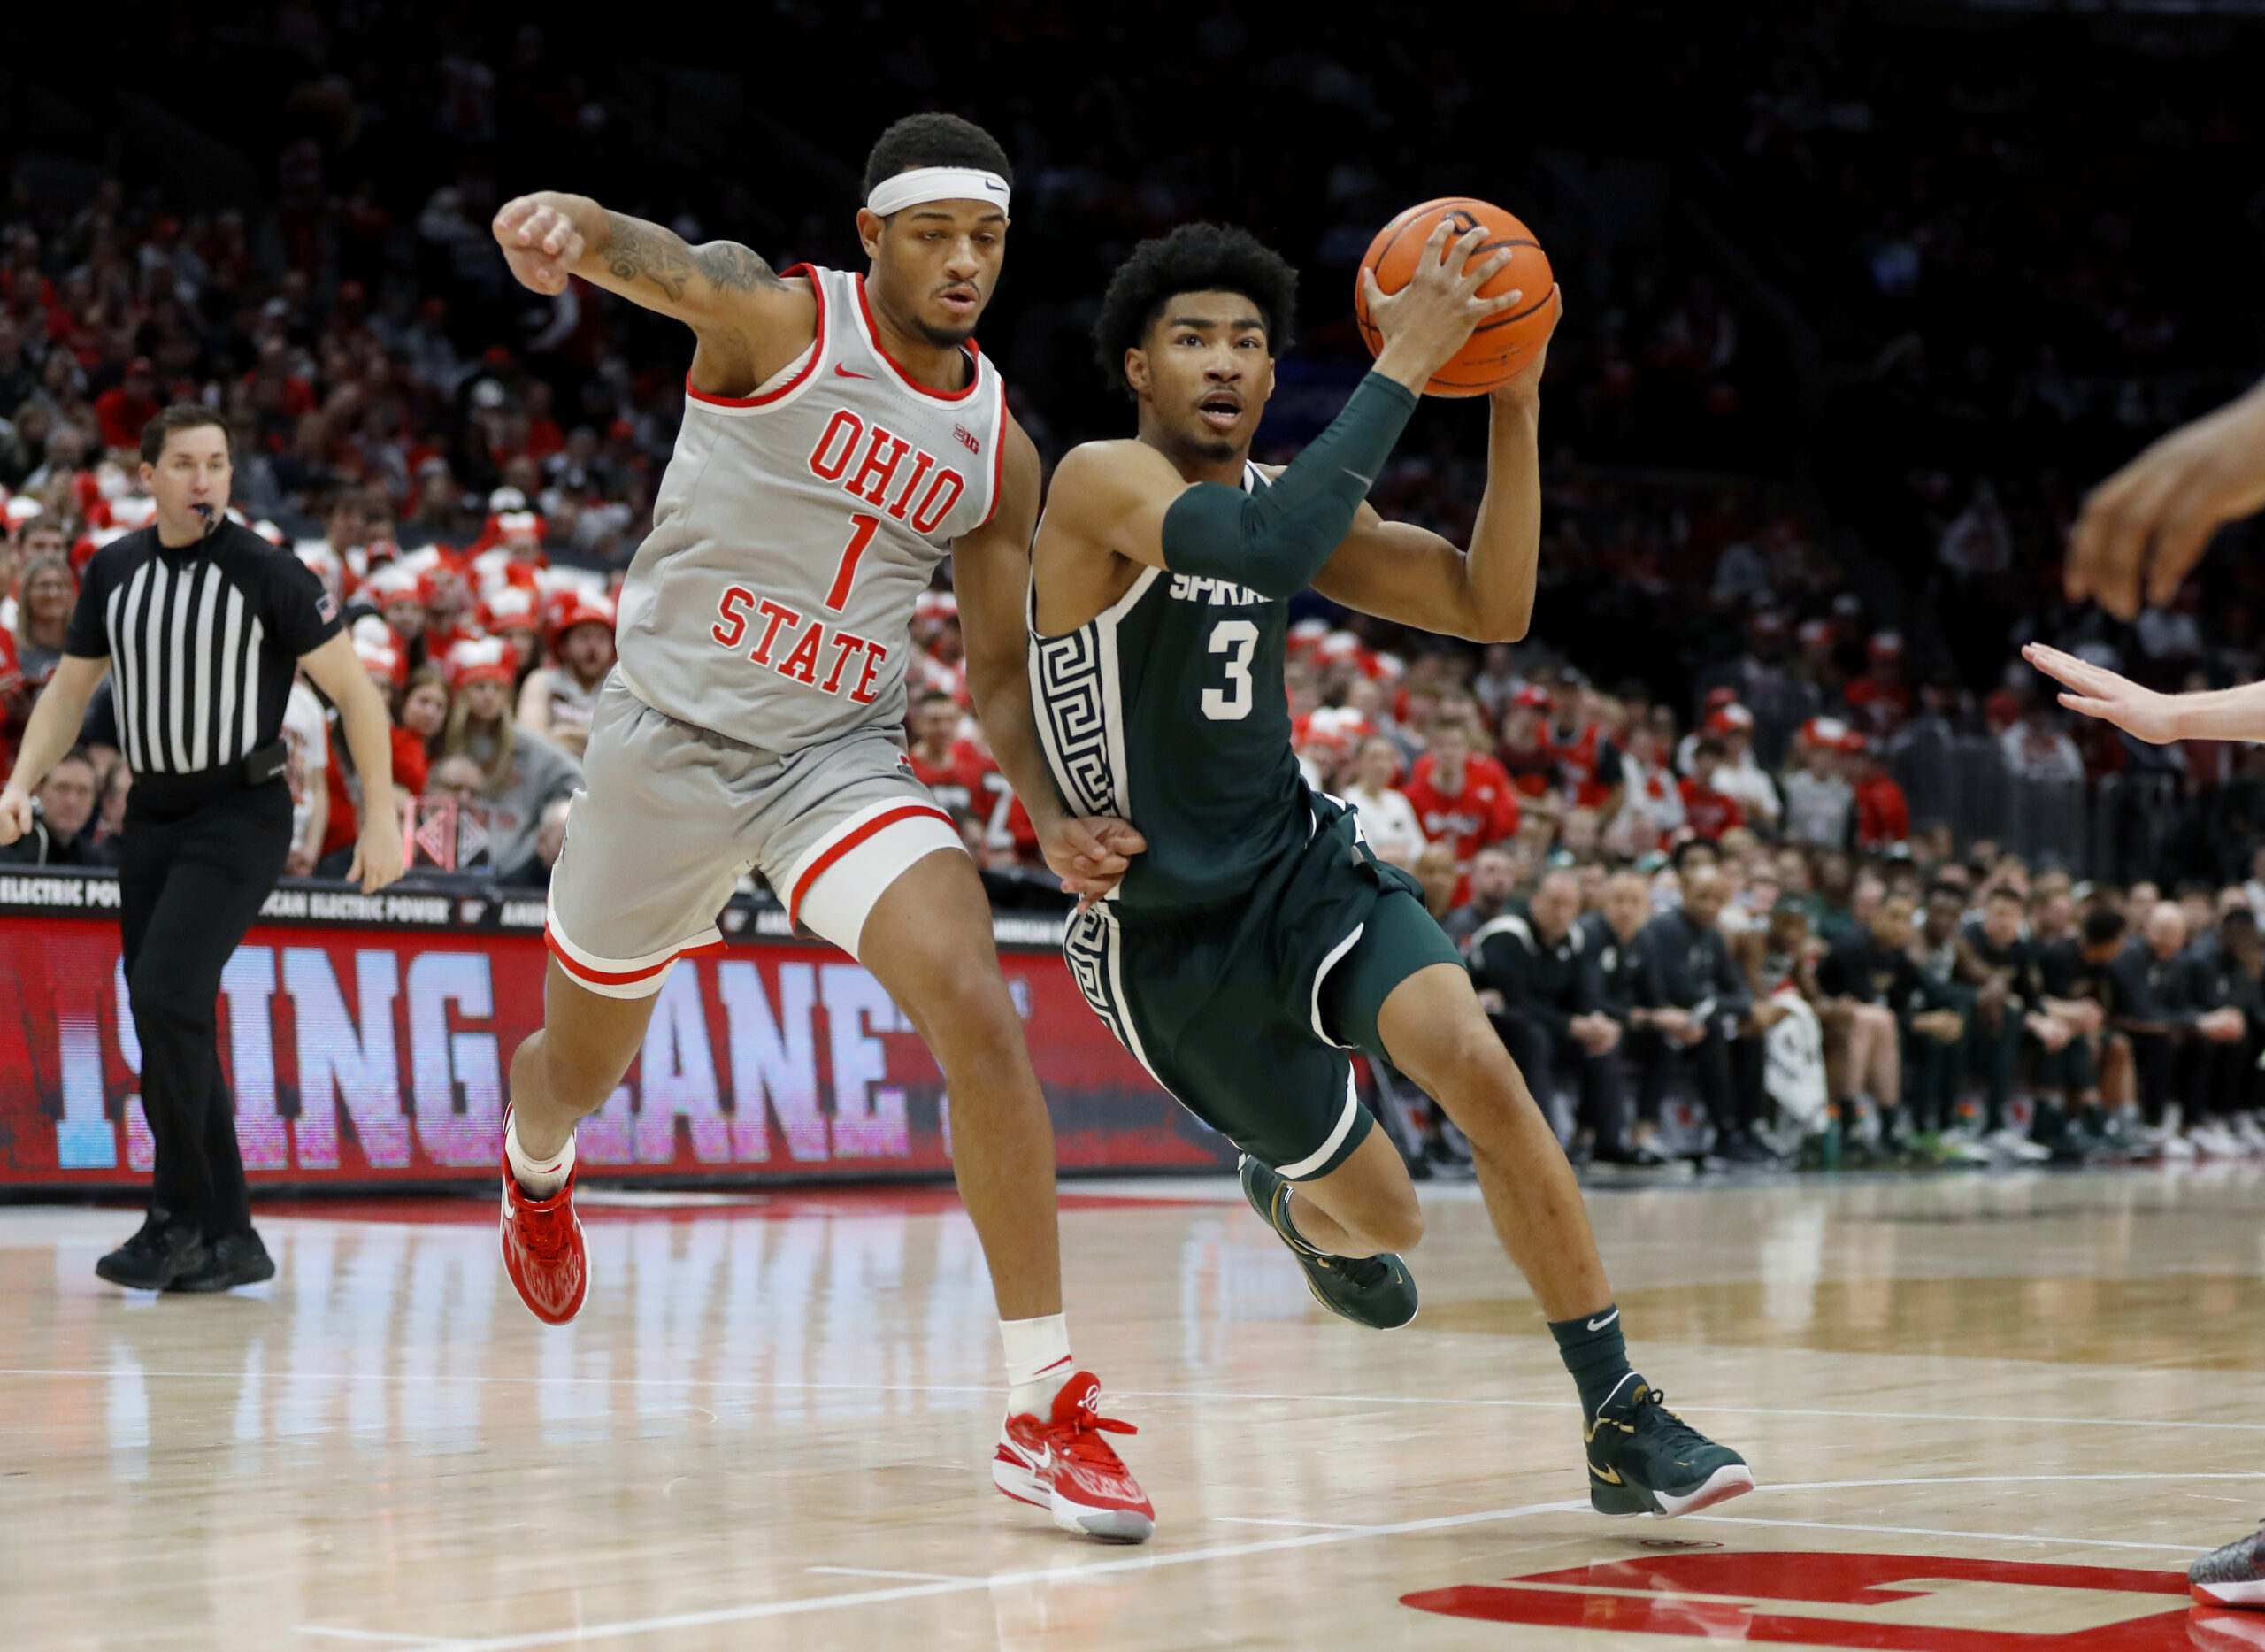 Watch highlights of MSU basketball’s dominant win over Ohio State